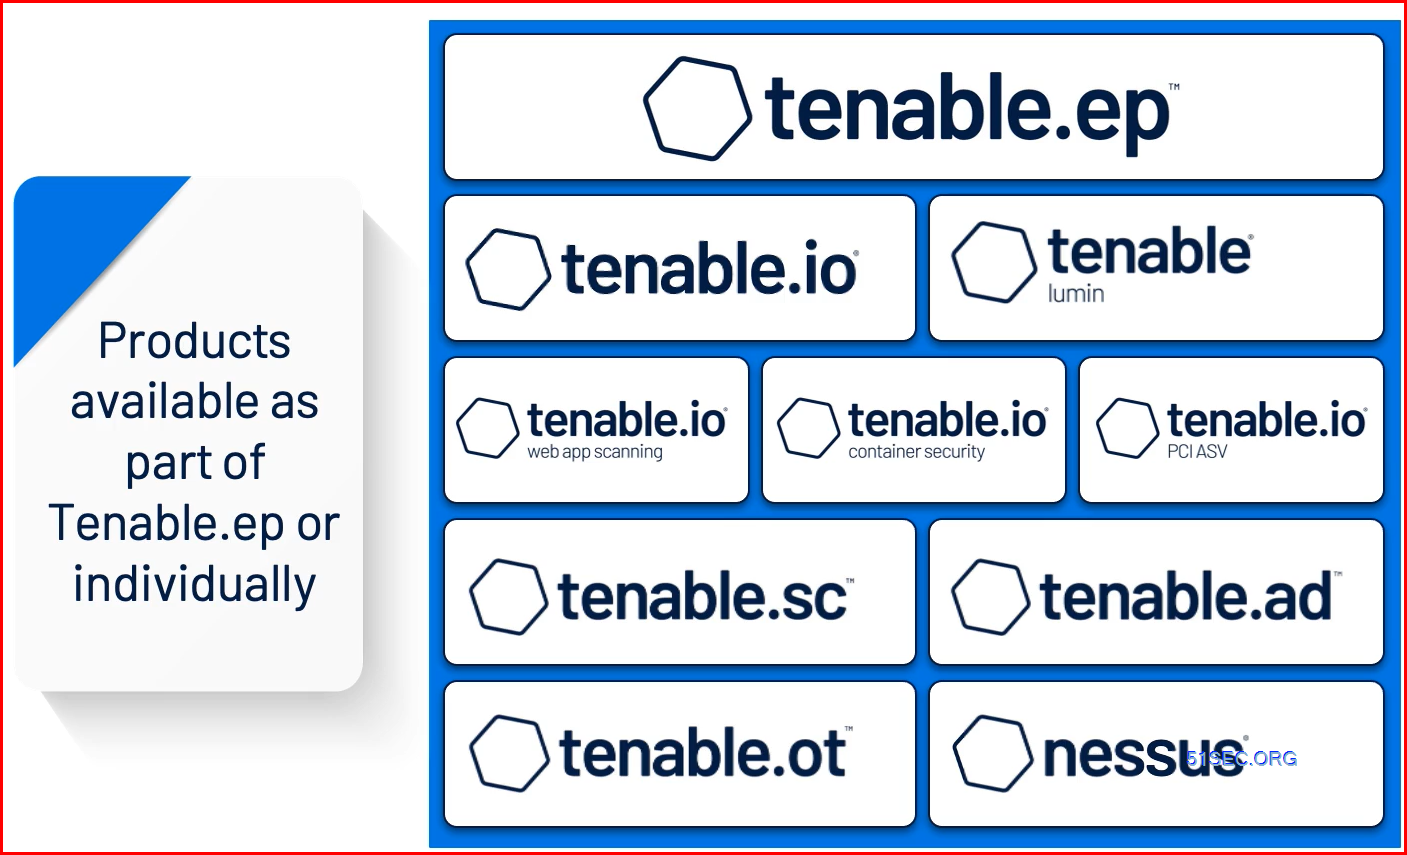 Tenable Nessus Professional / Expert Installation (Web Application Scanning, Special Version in Linux etc)